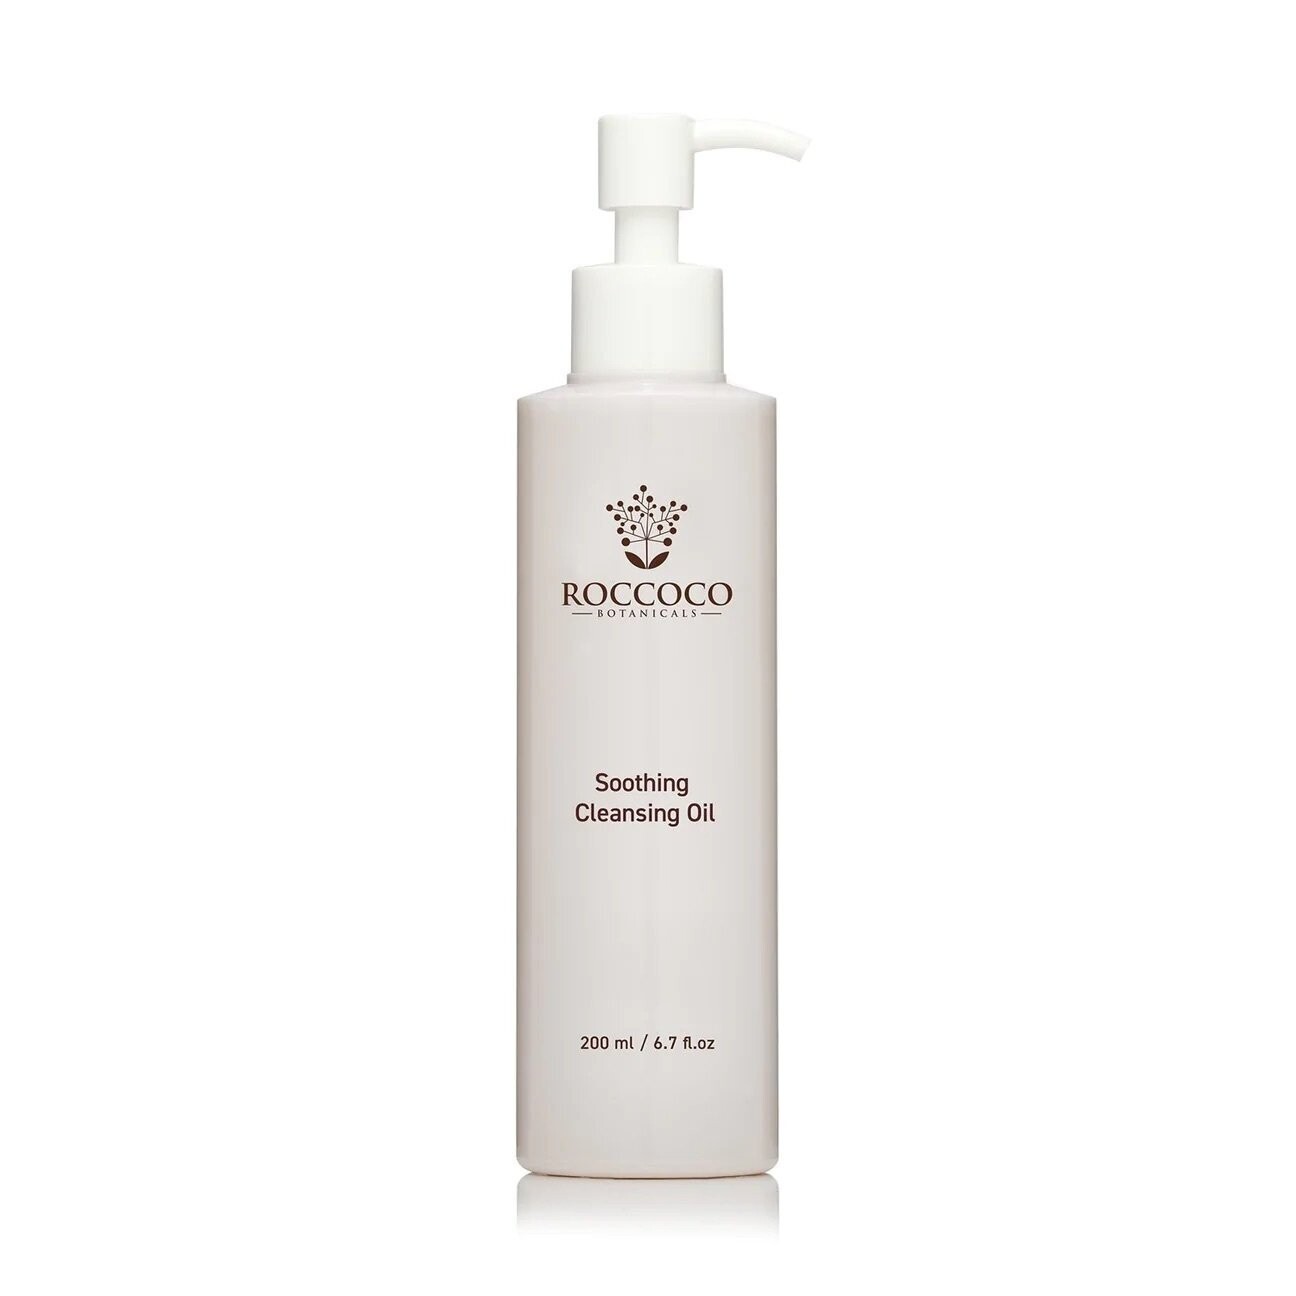 Roccoco Botanicals Soothing Oil Cleanser 6.7oz